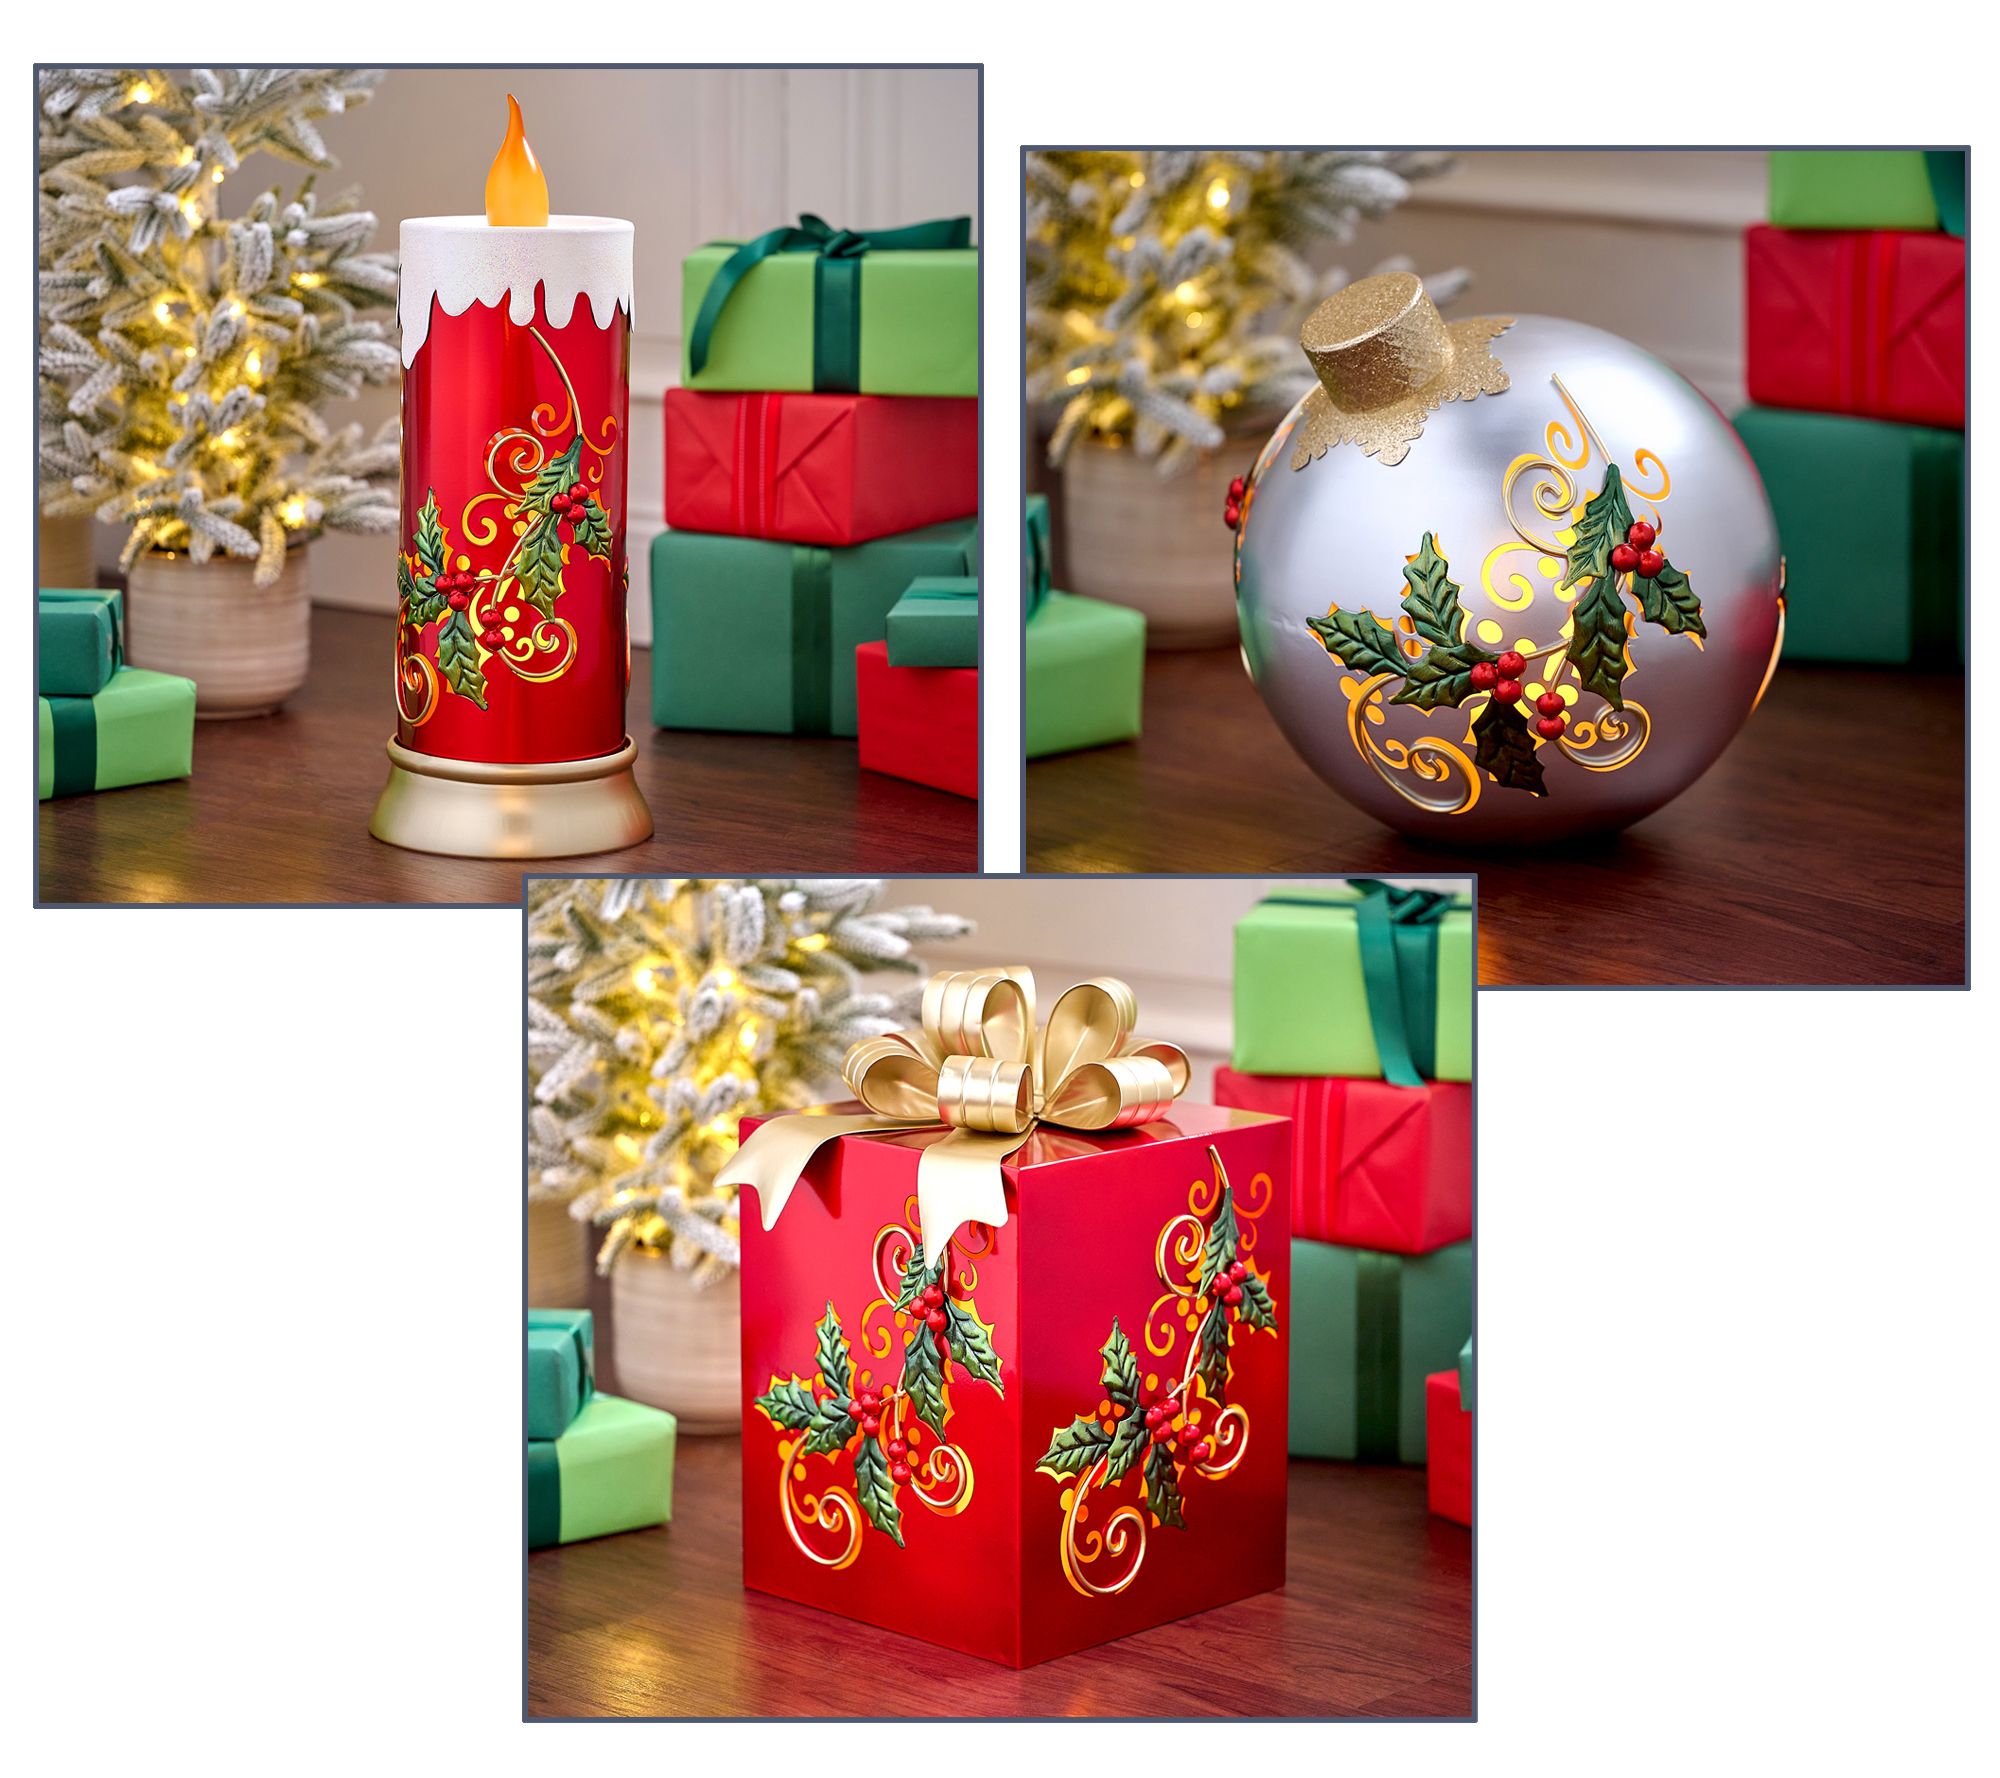 Indoor/Outdoor Flickering Flame Holiday Decor By Valerie - QVC.com